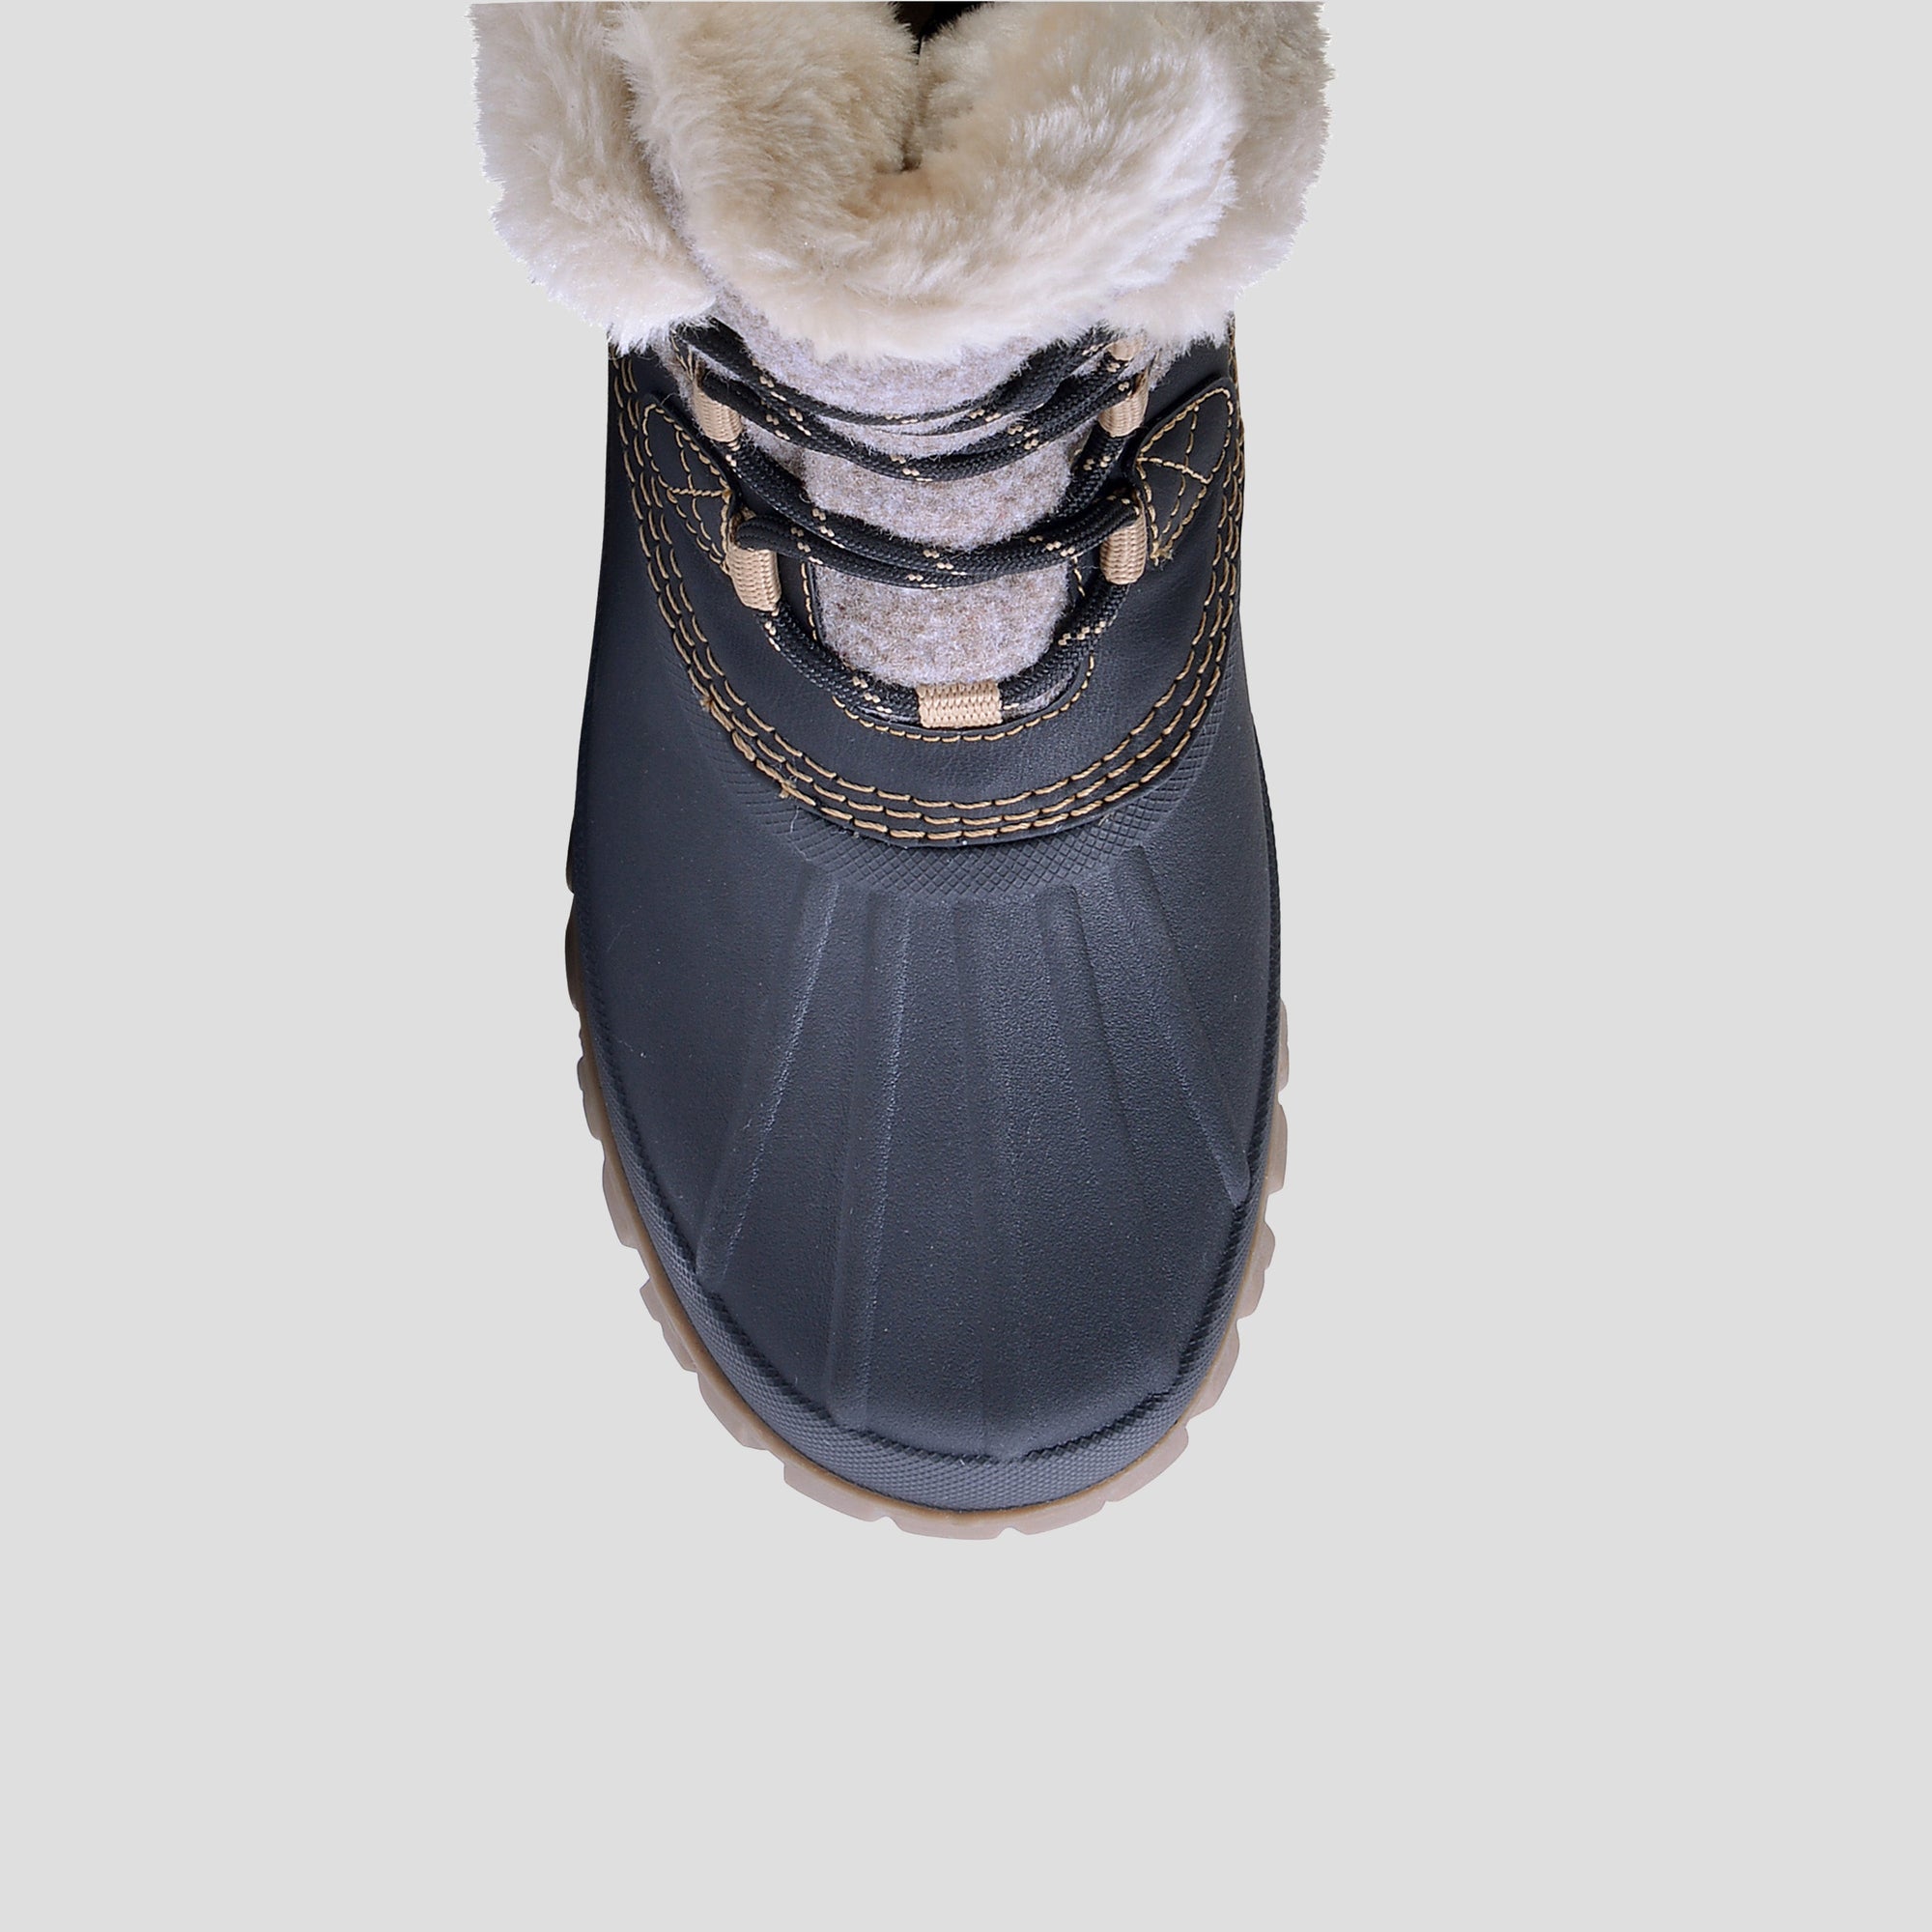 Cozy Flannel Winter Boot - Color Black-Taupe